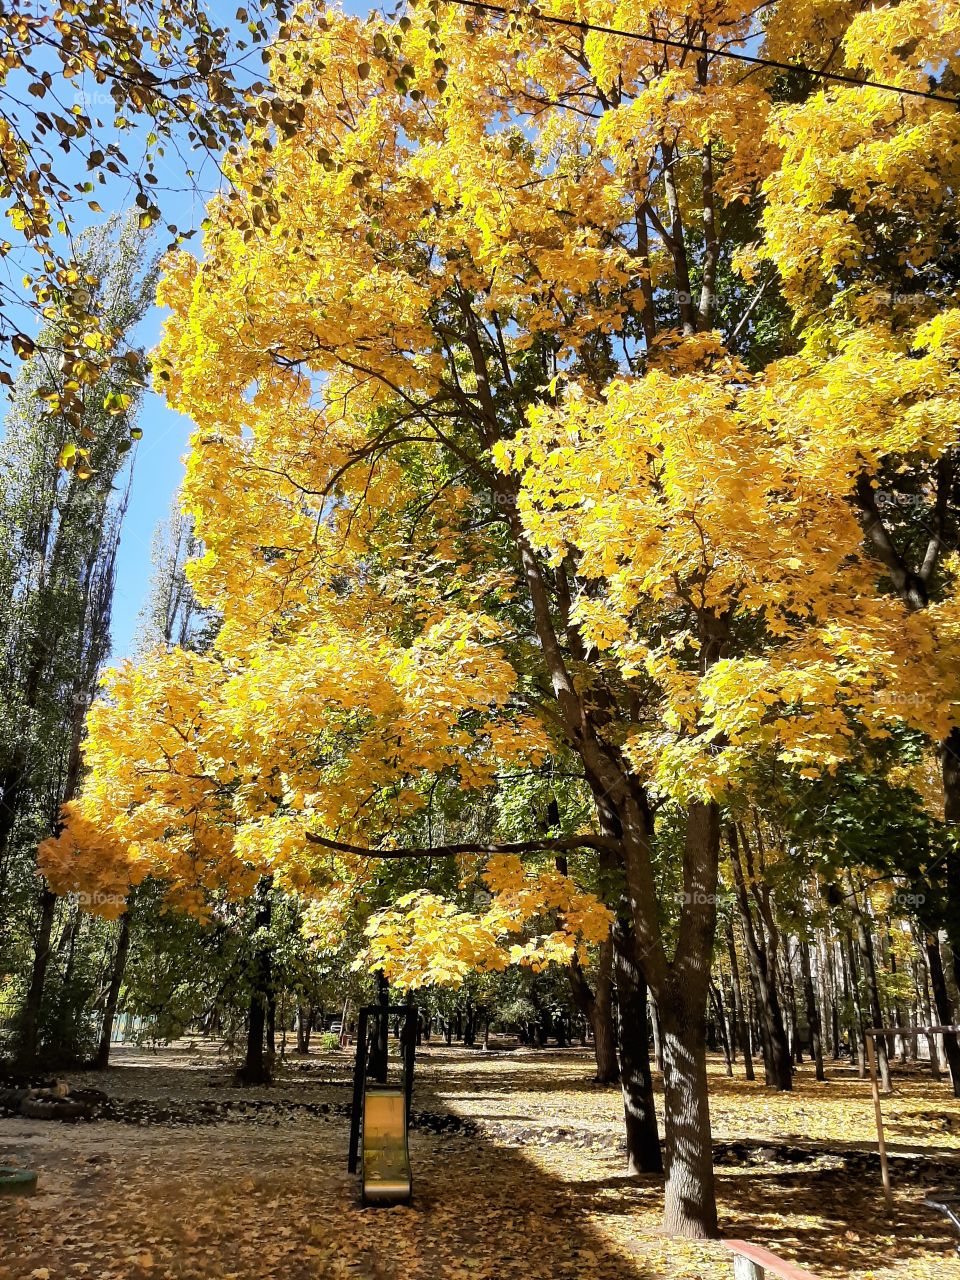 autumn trees with yellow leaves